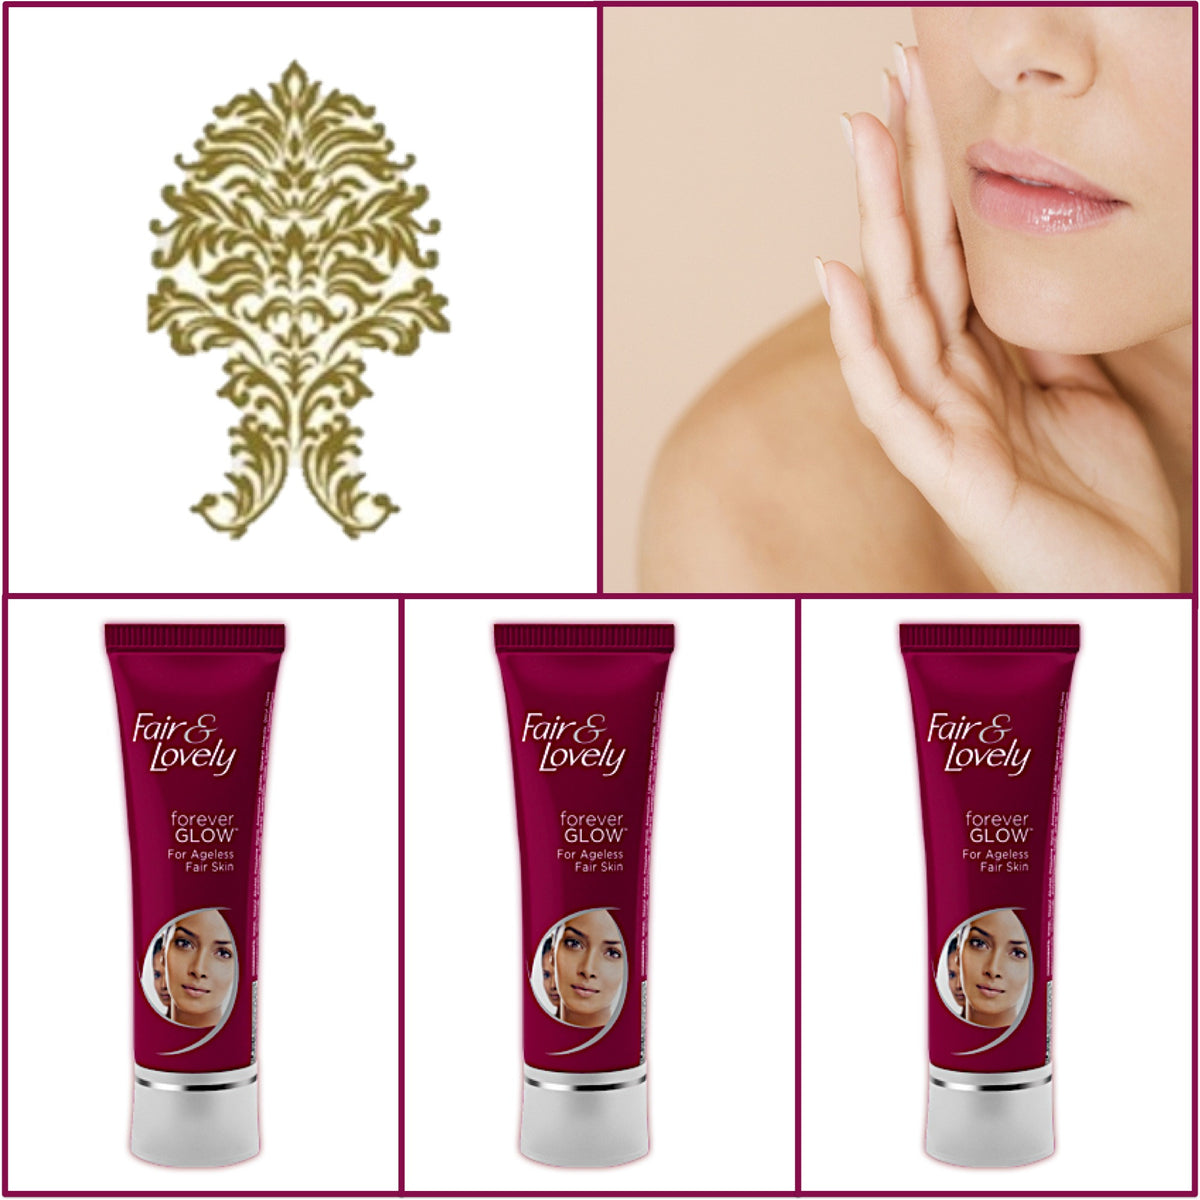 3 Pack Fair & Lovely Forever Glow Cream - Younger Looking Skin 50g Each